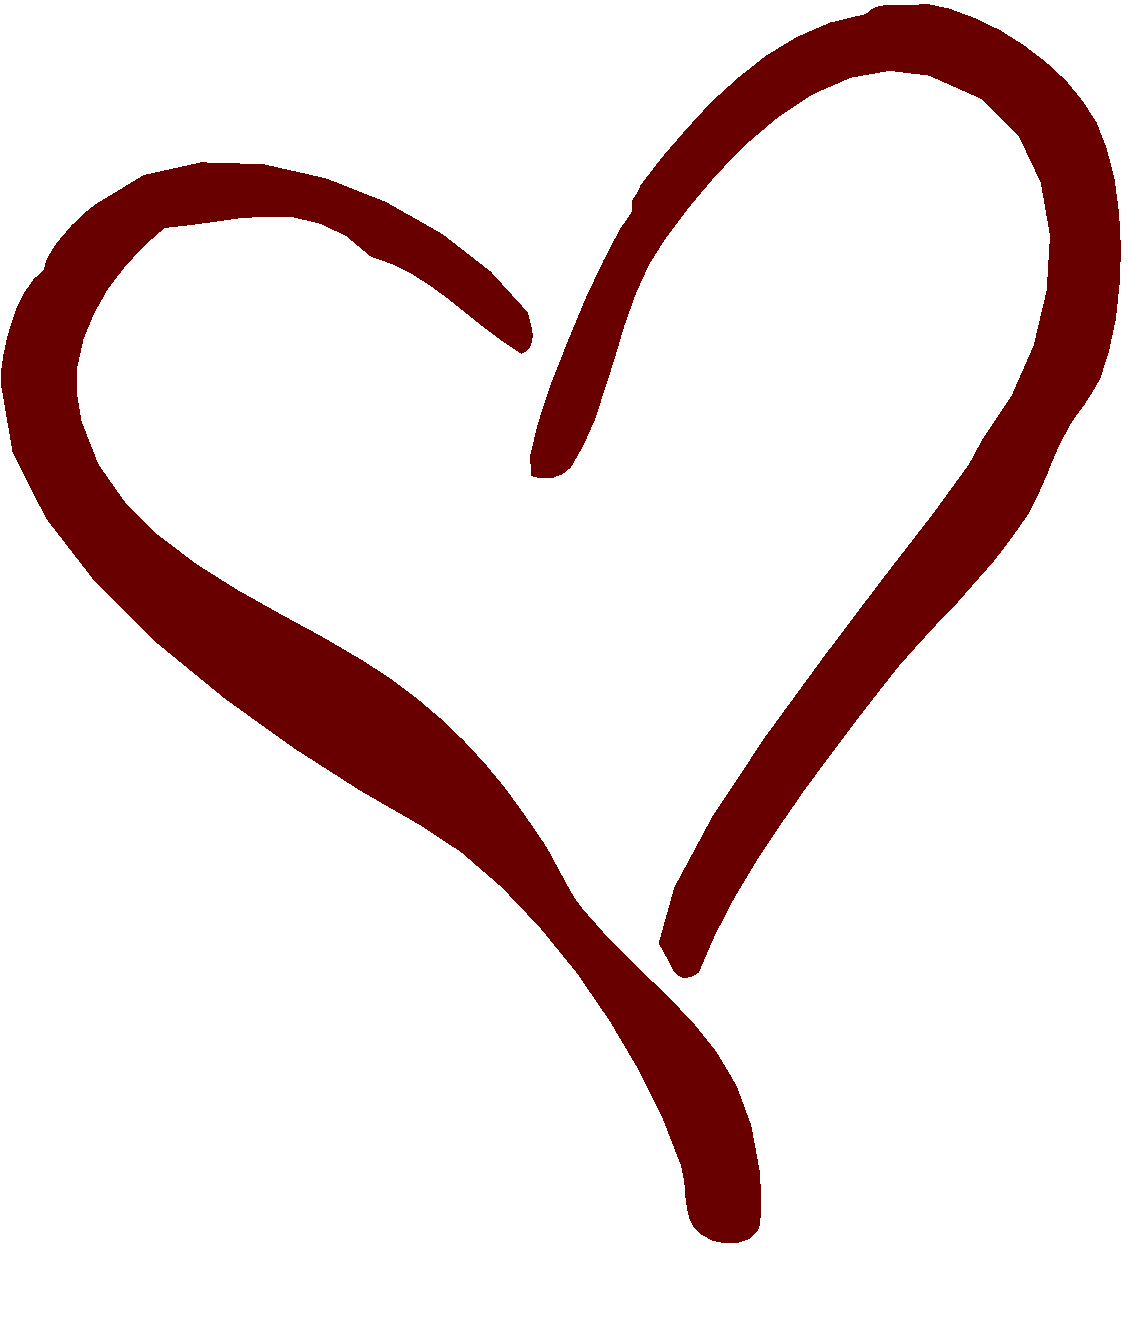 Heart Of Hearts Png Images Clipart